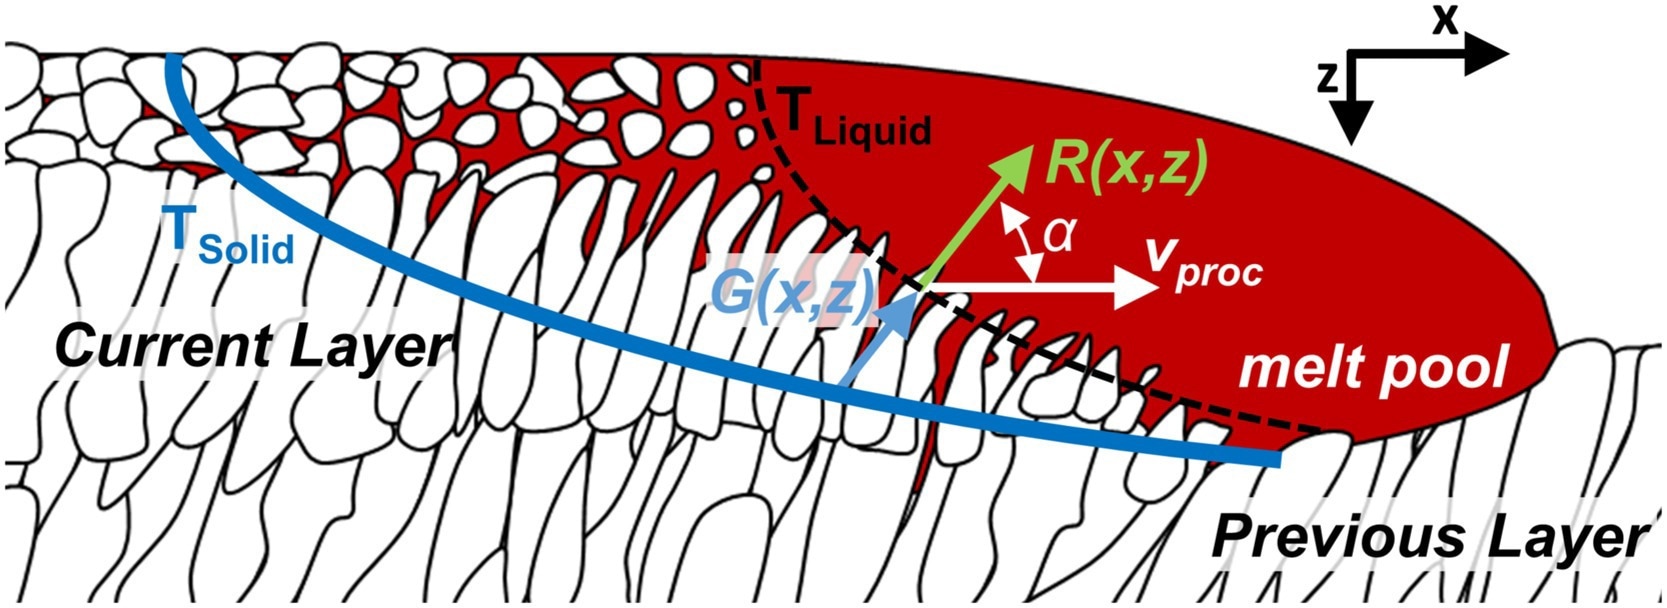 Schematic sketch of local solidification front during L-DED manufacturing. The direction of the movement of the laser beam is from left to right (green arrow). Liquid material is represented by the red colour, while solid material is shown in white. The melt solidifies between liquidus isotherm (dashed black line) and solidus isotherm (blue line).